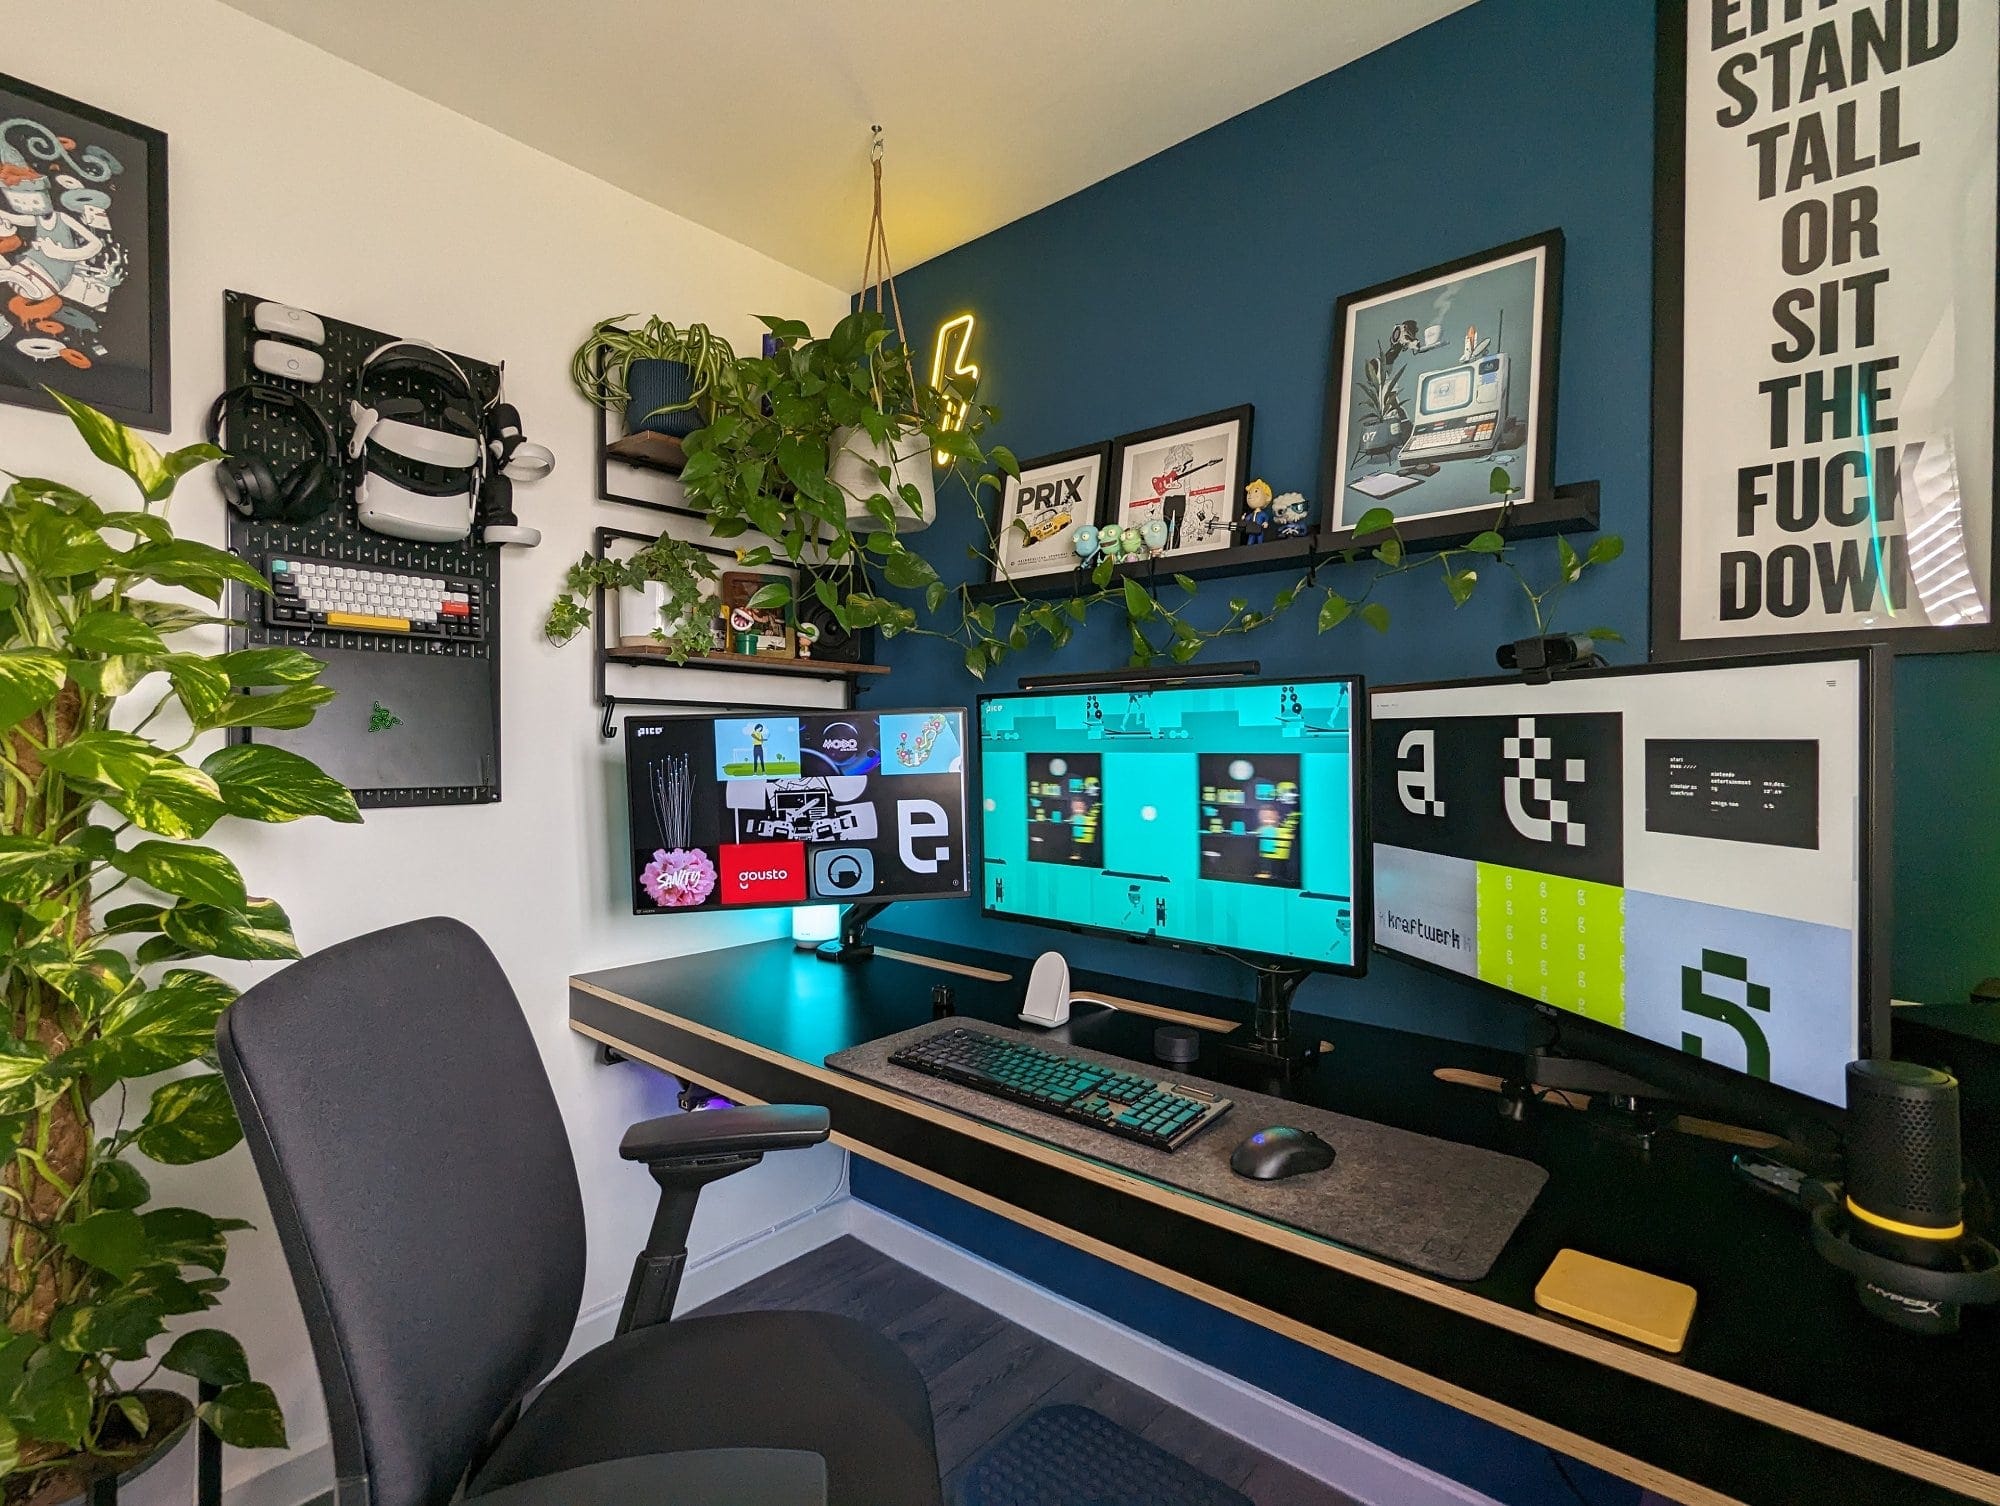 A modern home office setup with a triple-monitor desk, accented by lush green plants, a pegboard organiser with tech accessories, framed art, and motivational posters, illuminated by stylish lighting